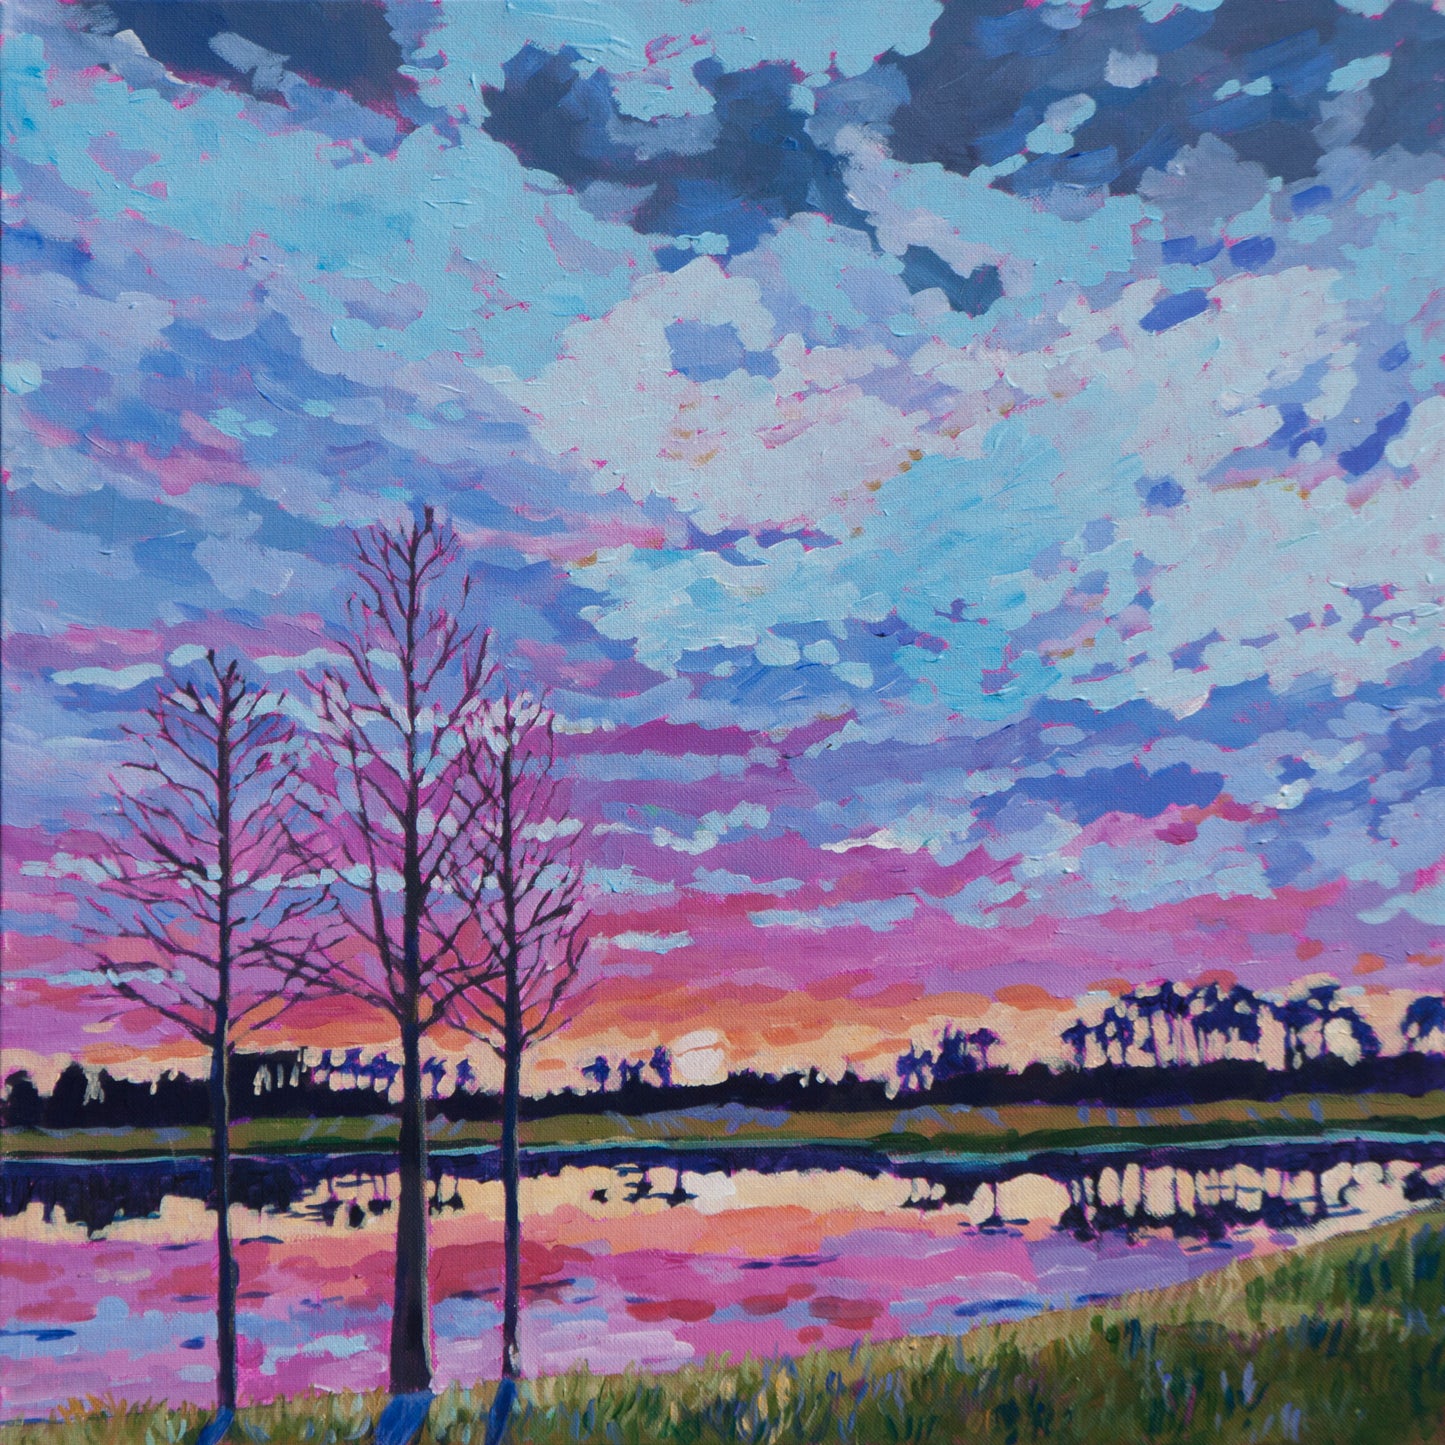 bare cypress trees by water in dramatic sunrise painting in florida